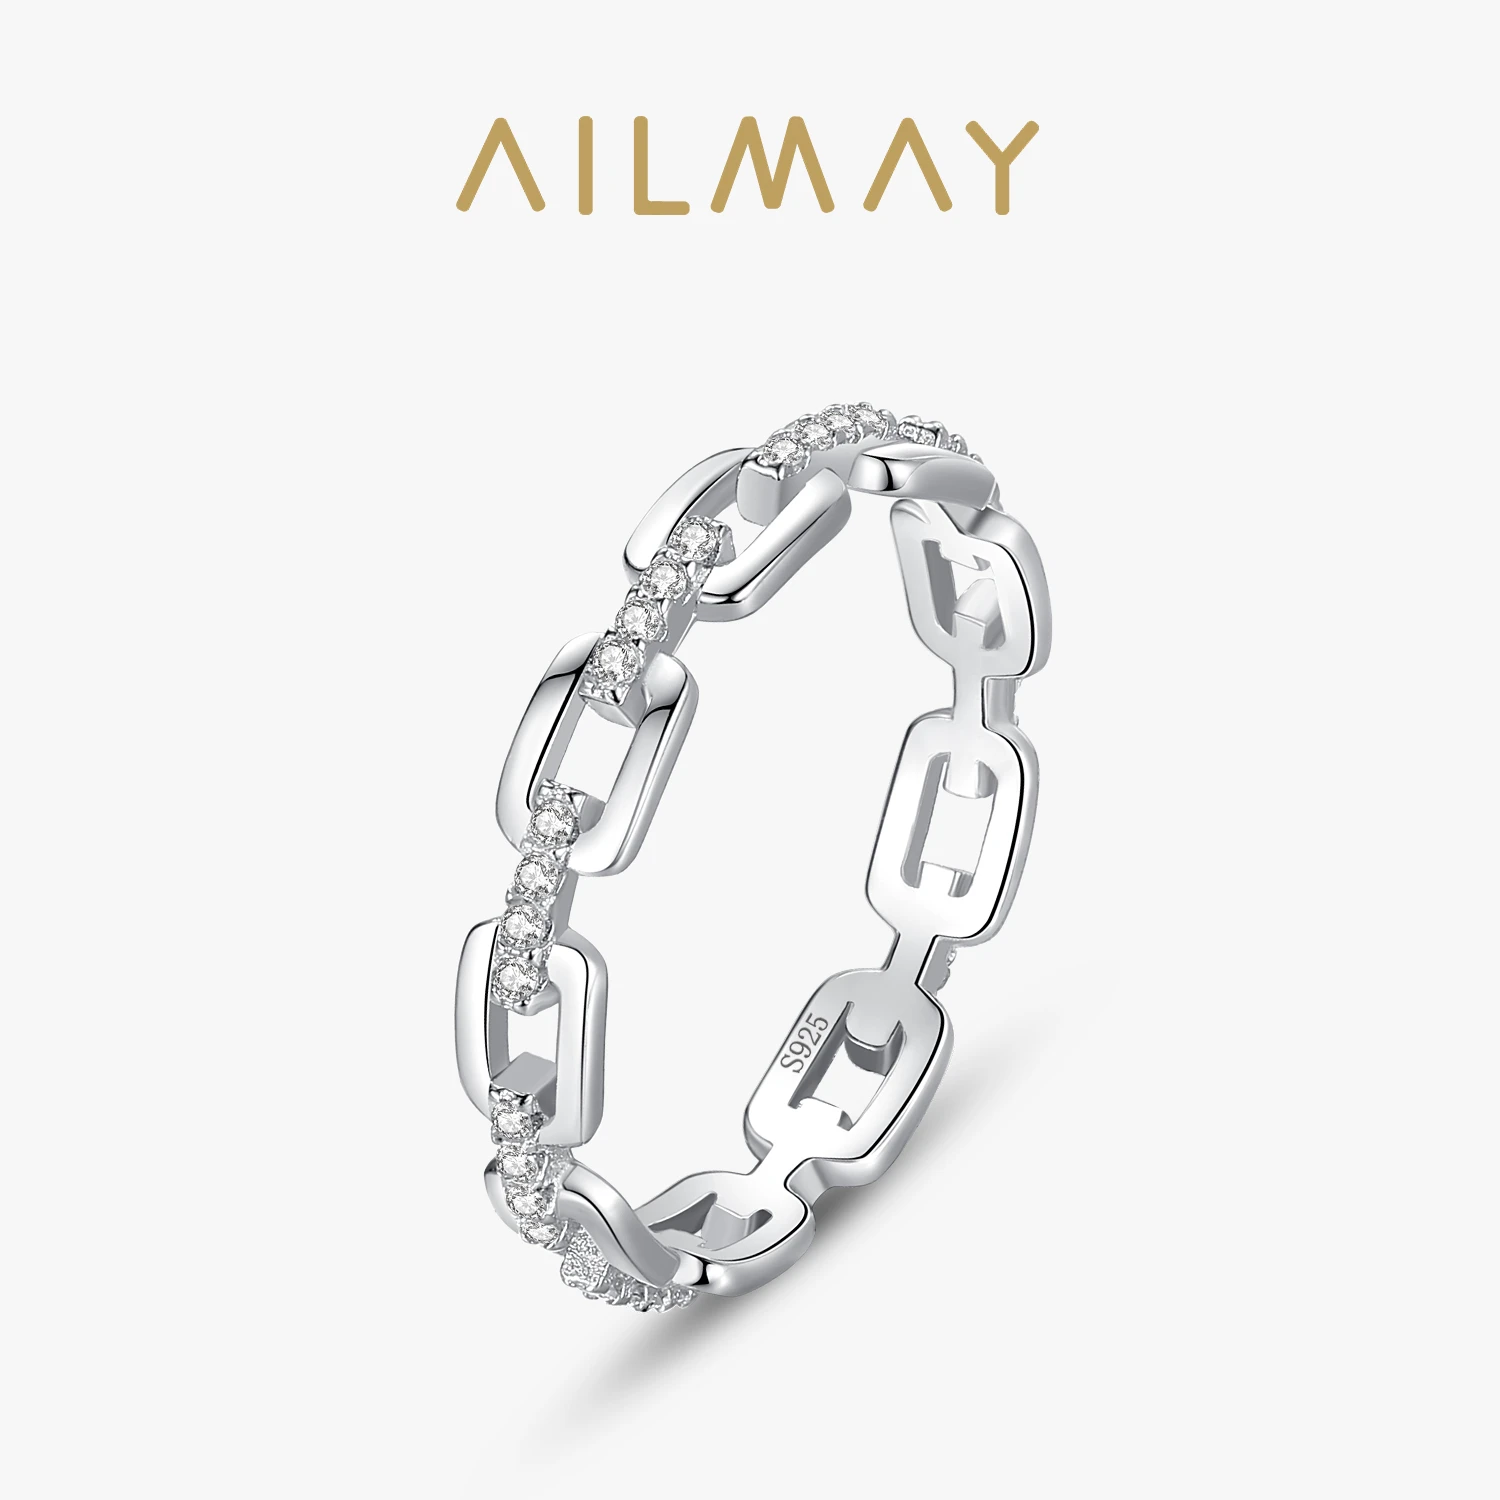 Ailmay 100% 925 Sterling Silver Simple Cadena Hueca Stackable Charm Finger Ring For Women Girls Party Accessories Jewelry